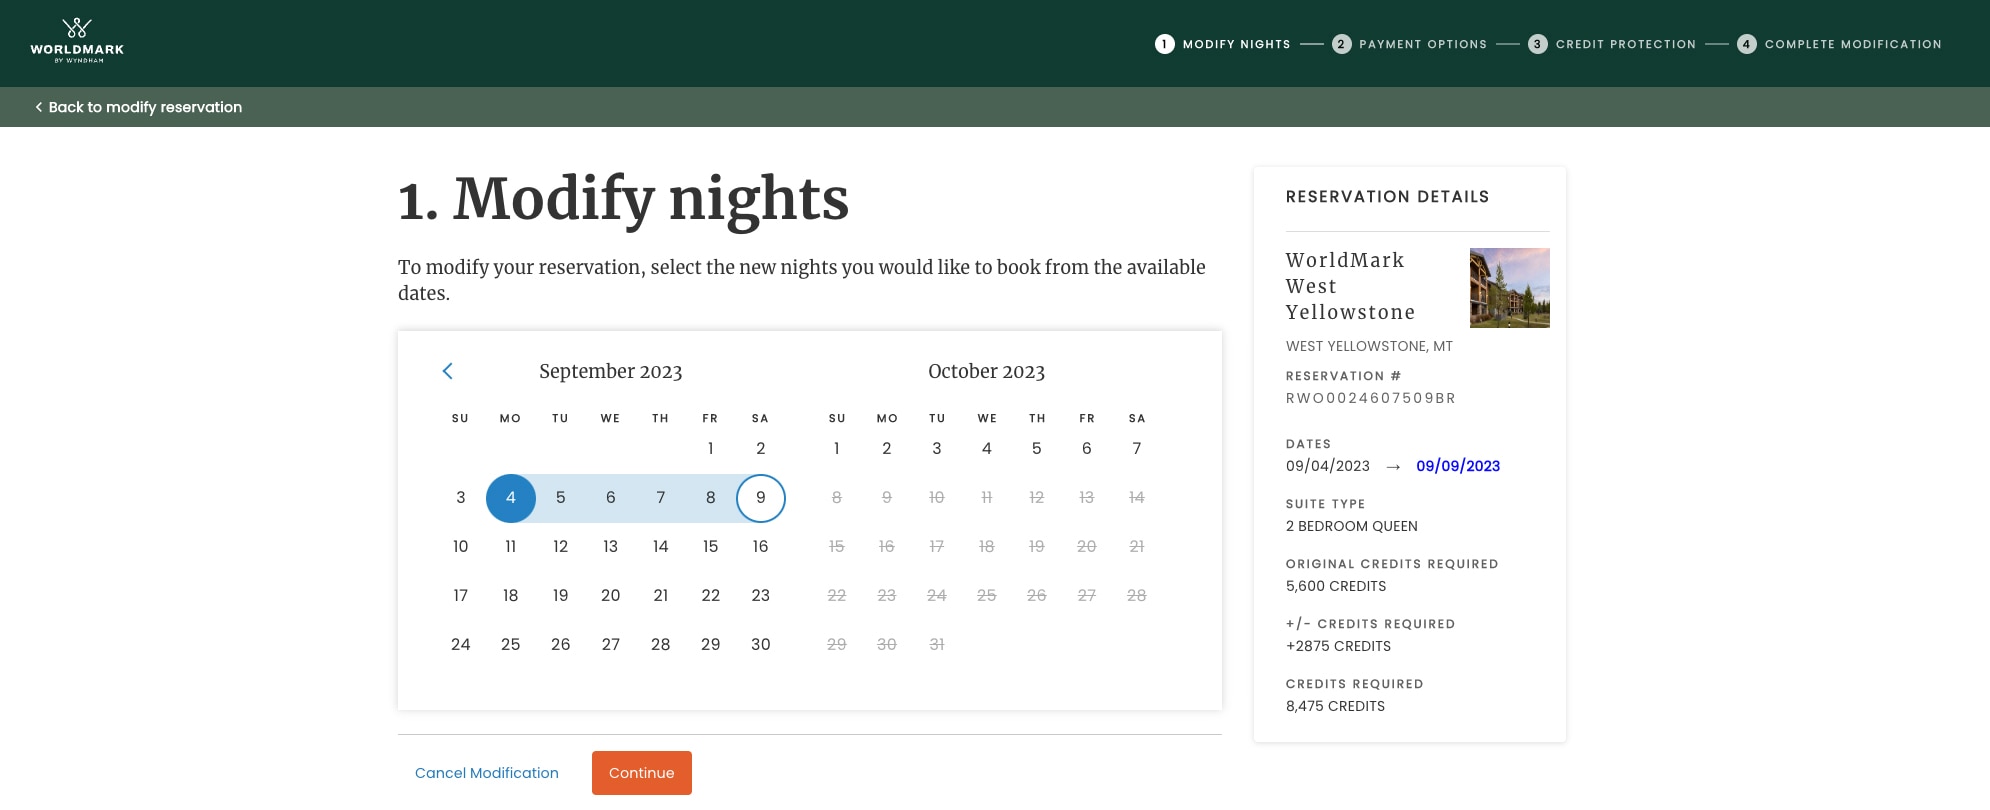 View of Modify nights monthly calendar search function on WorldMark owner website